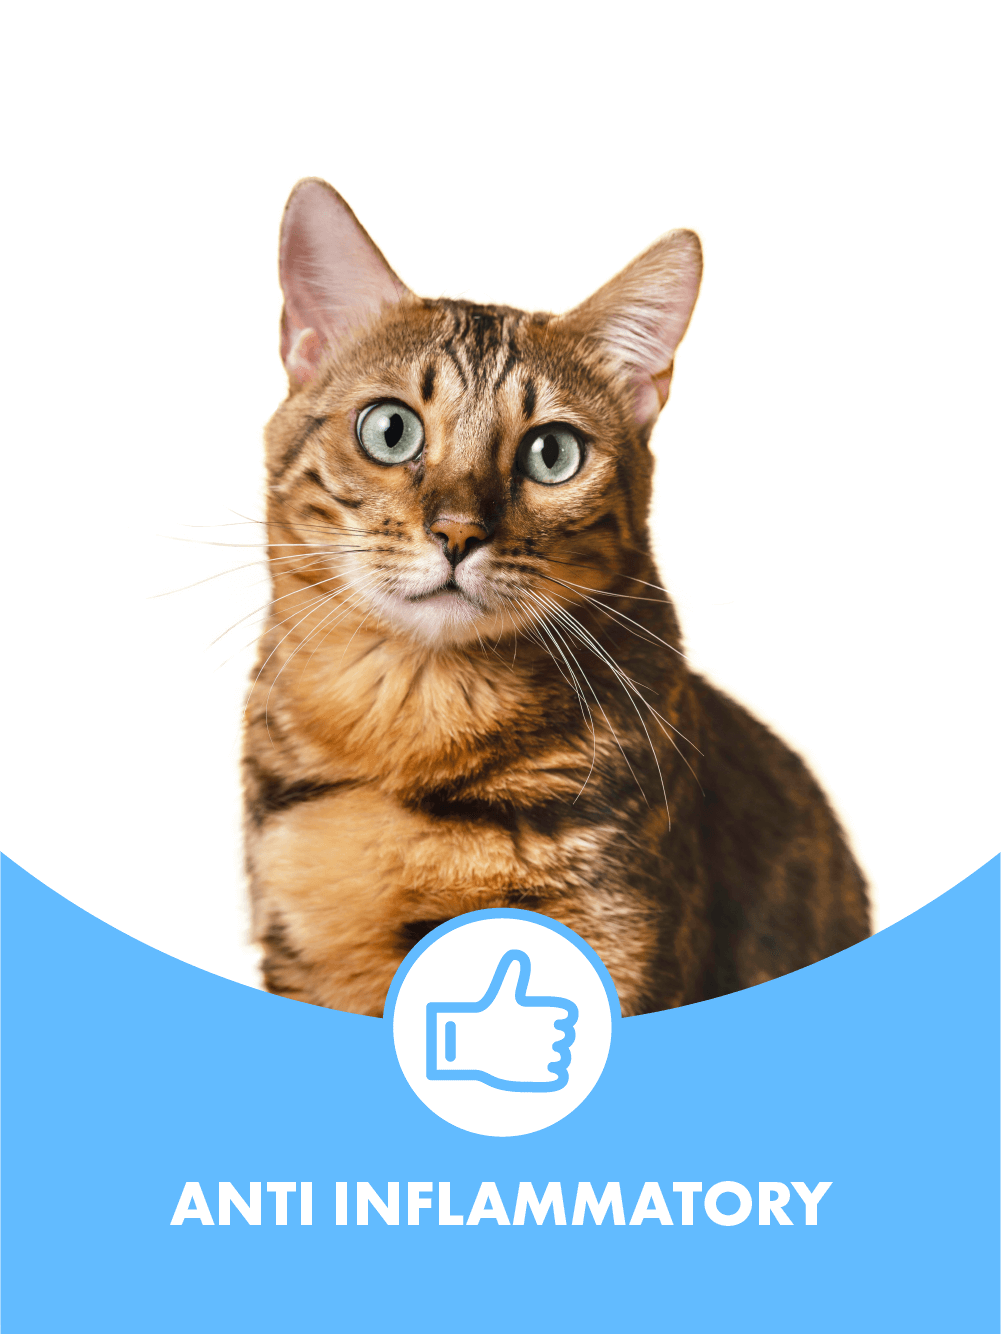 Cat - text has thumbs up and states that Multifit cat treats are anti inflammatory